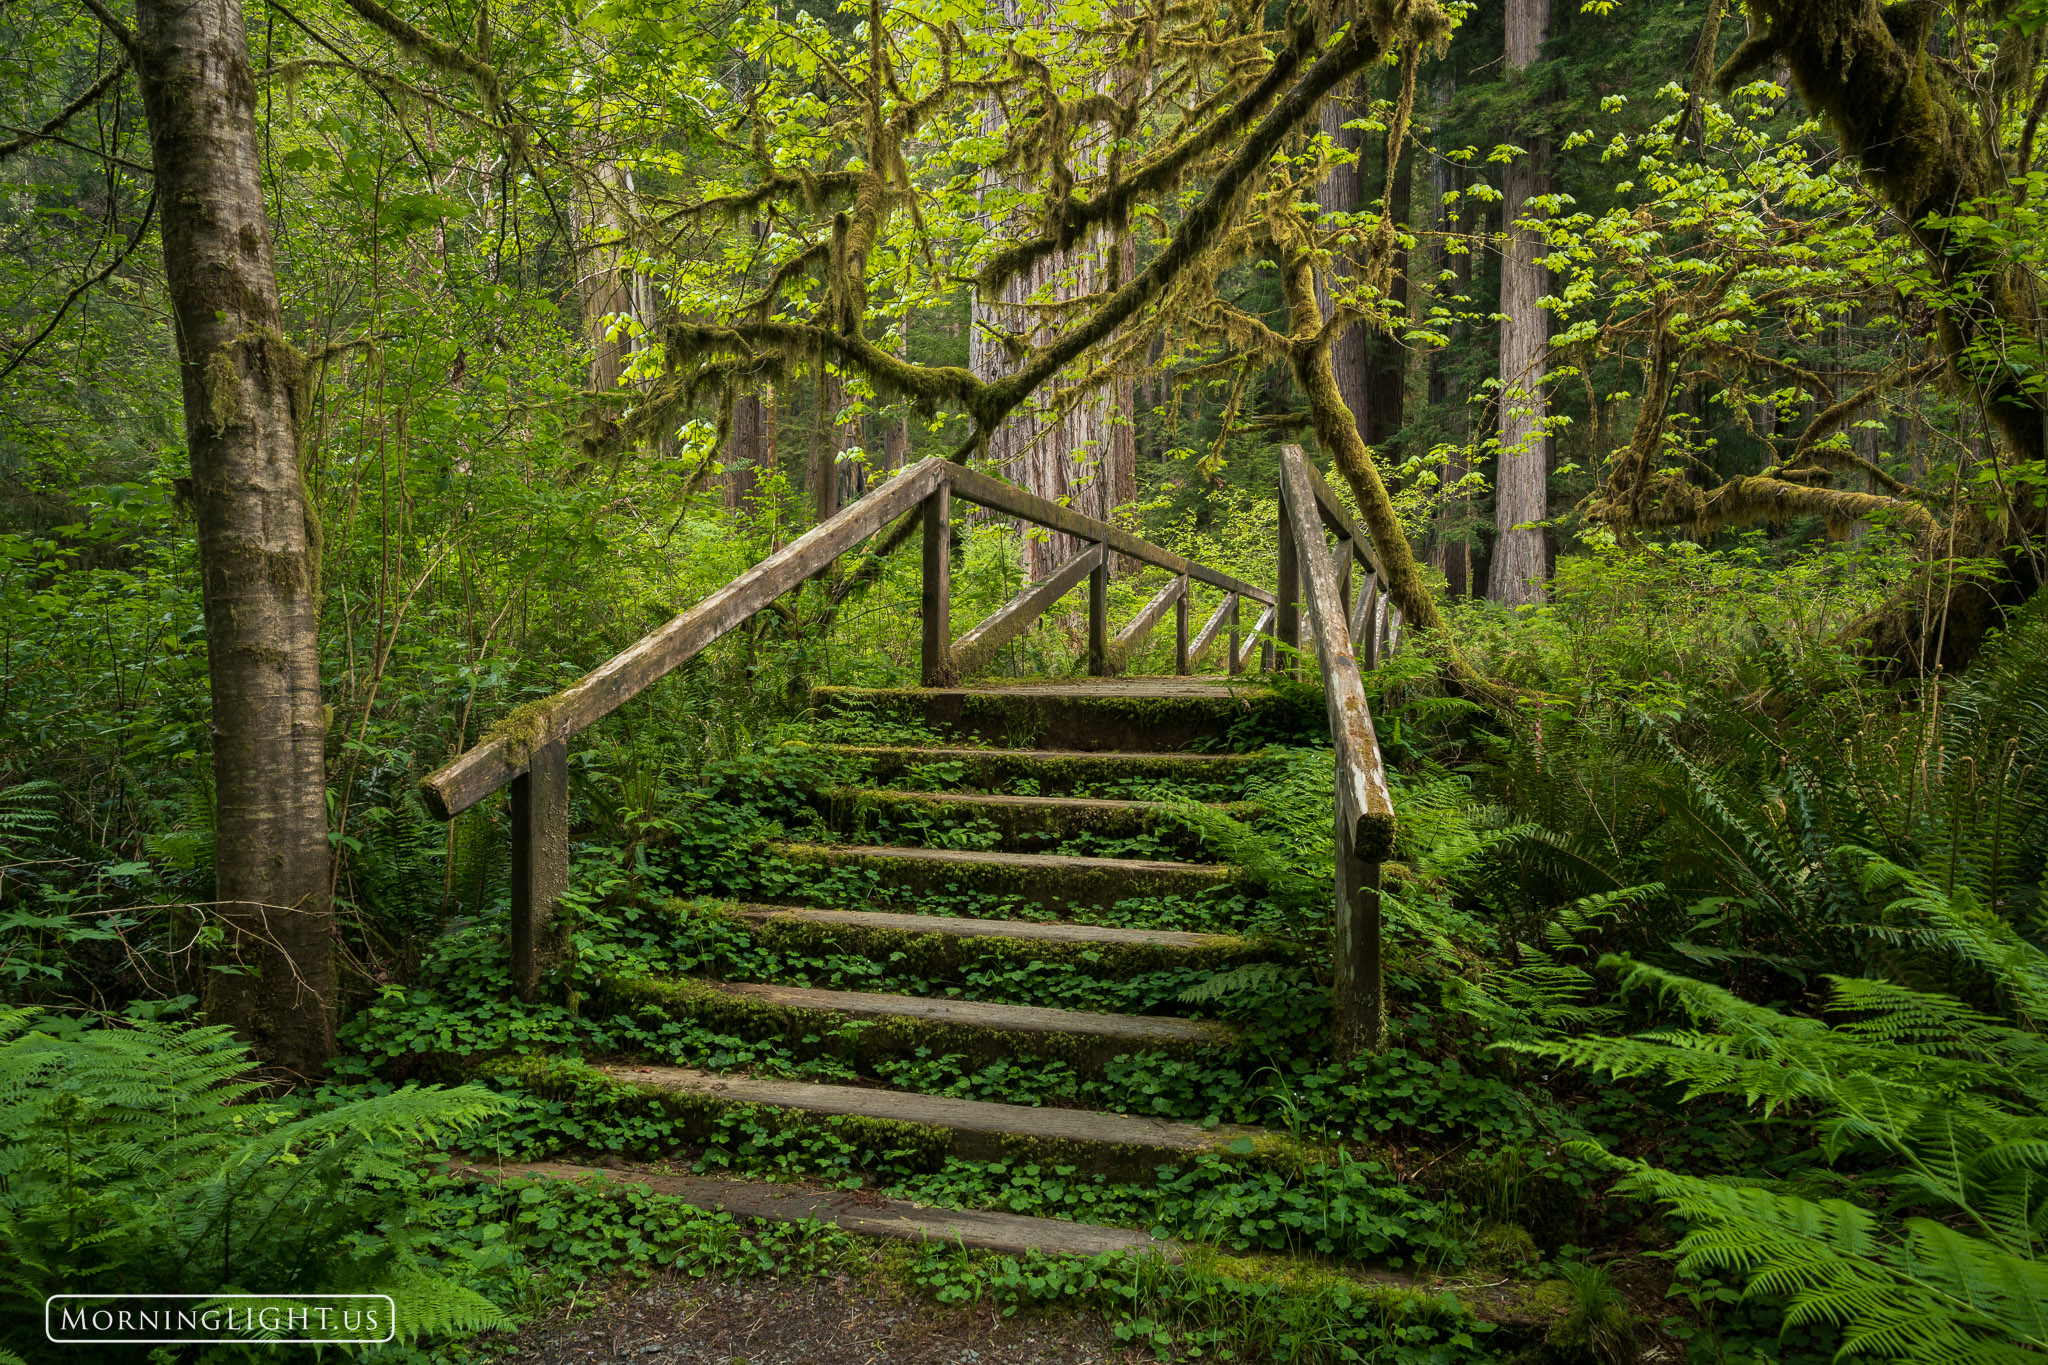 The steps leading up to this bridge seem to call you into the wild forest, almost into another world. We need to heed its call...